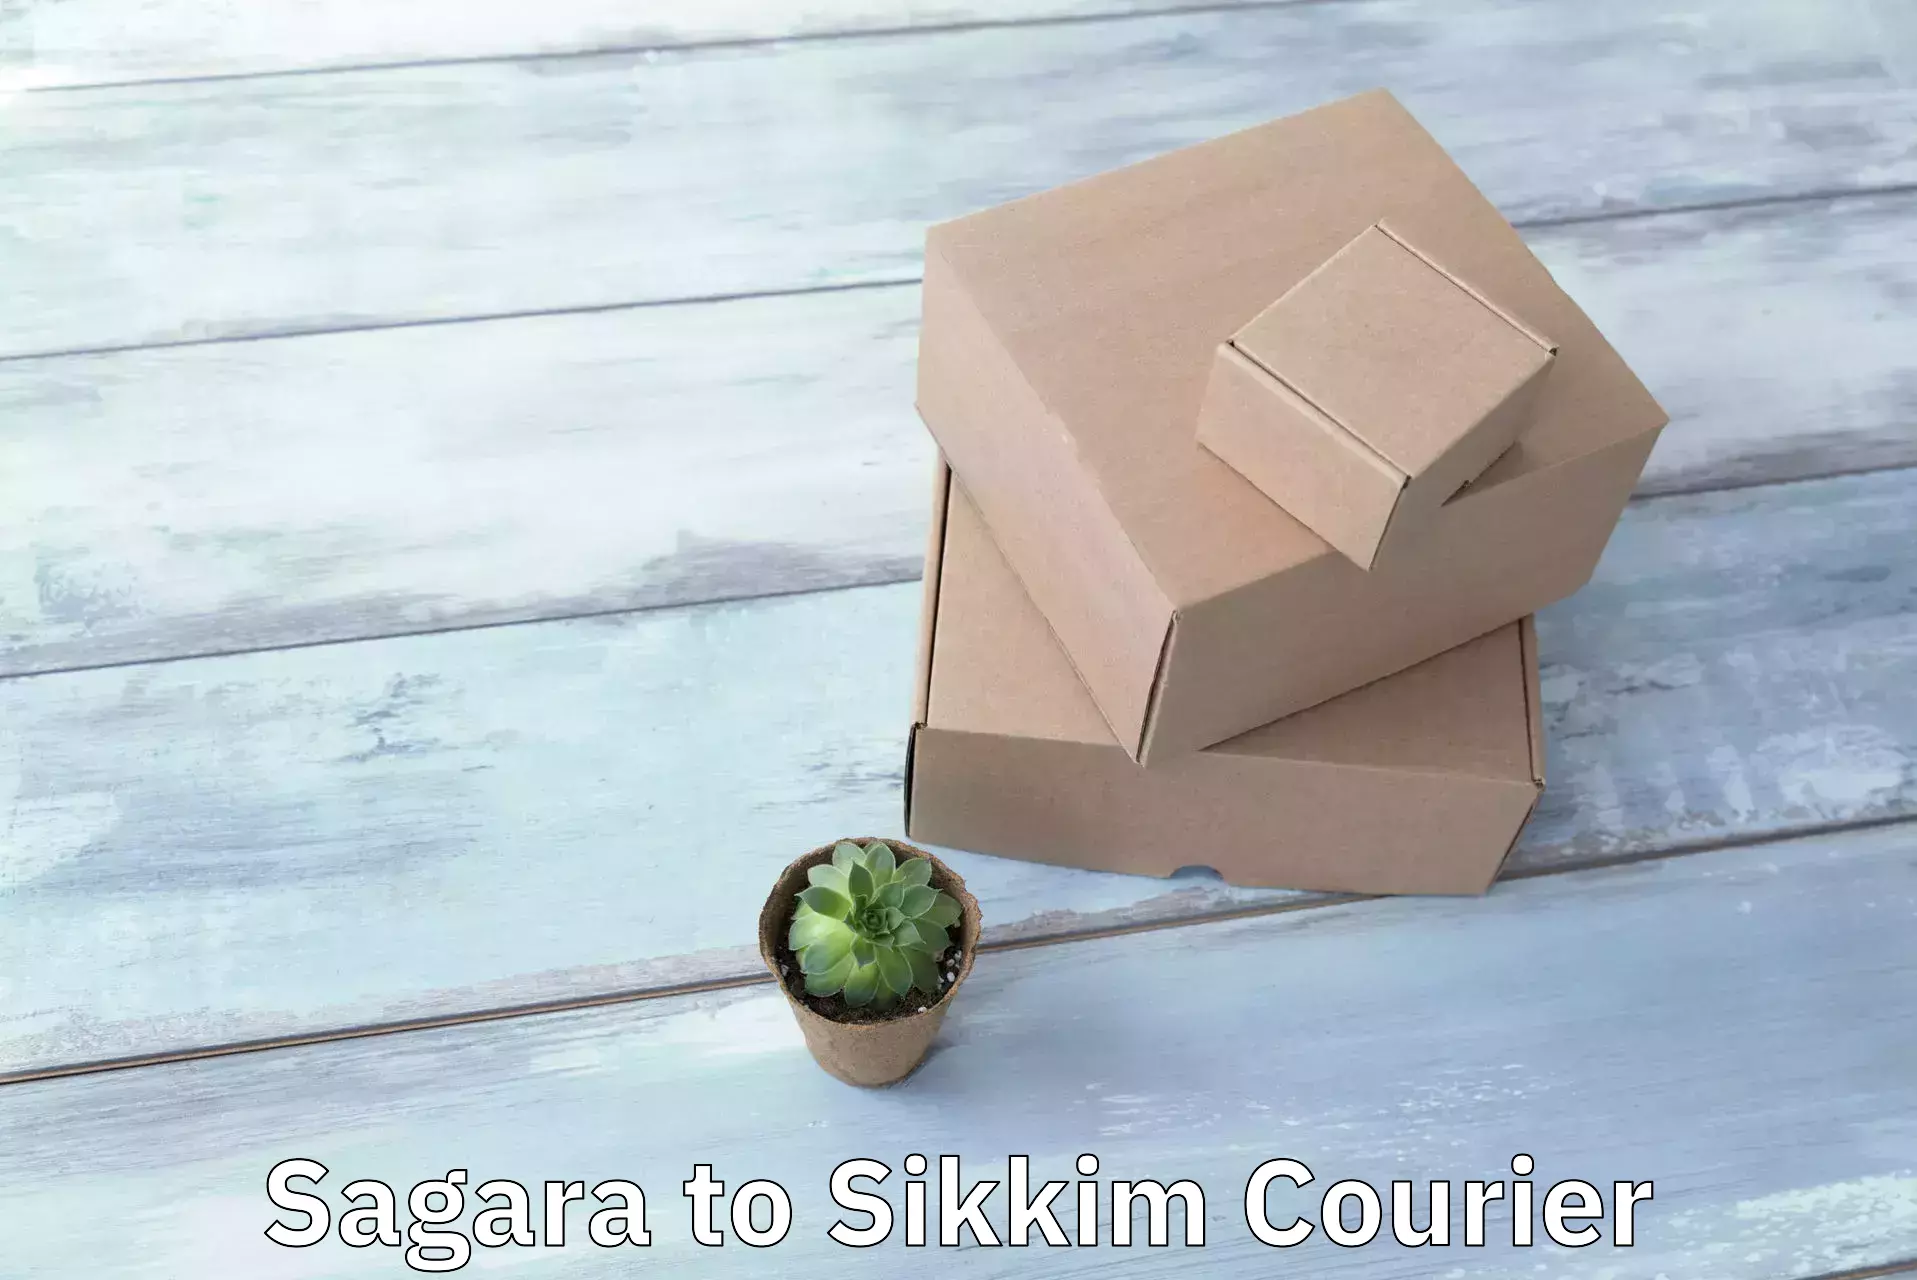 State-of-the-art courier technology Sagara to Sikkim